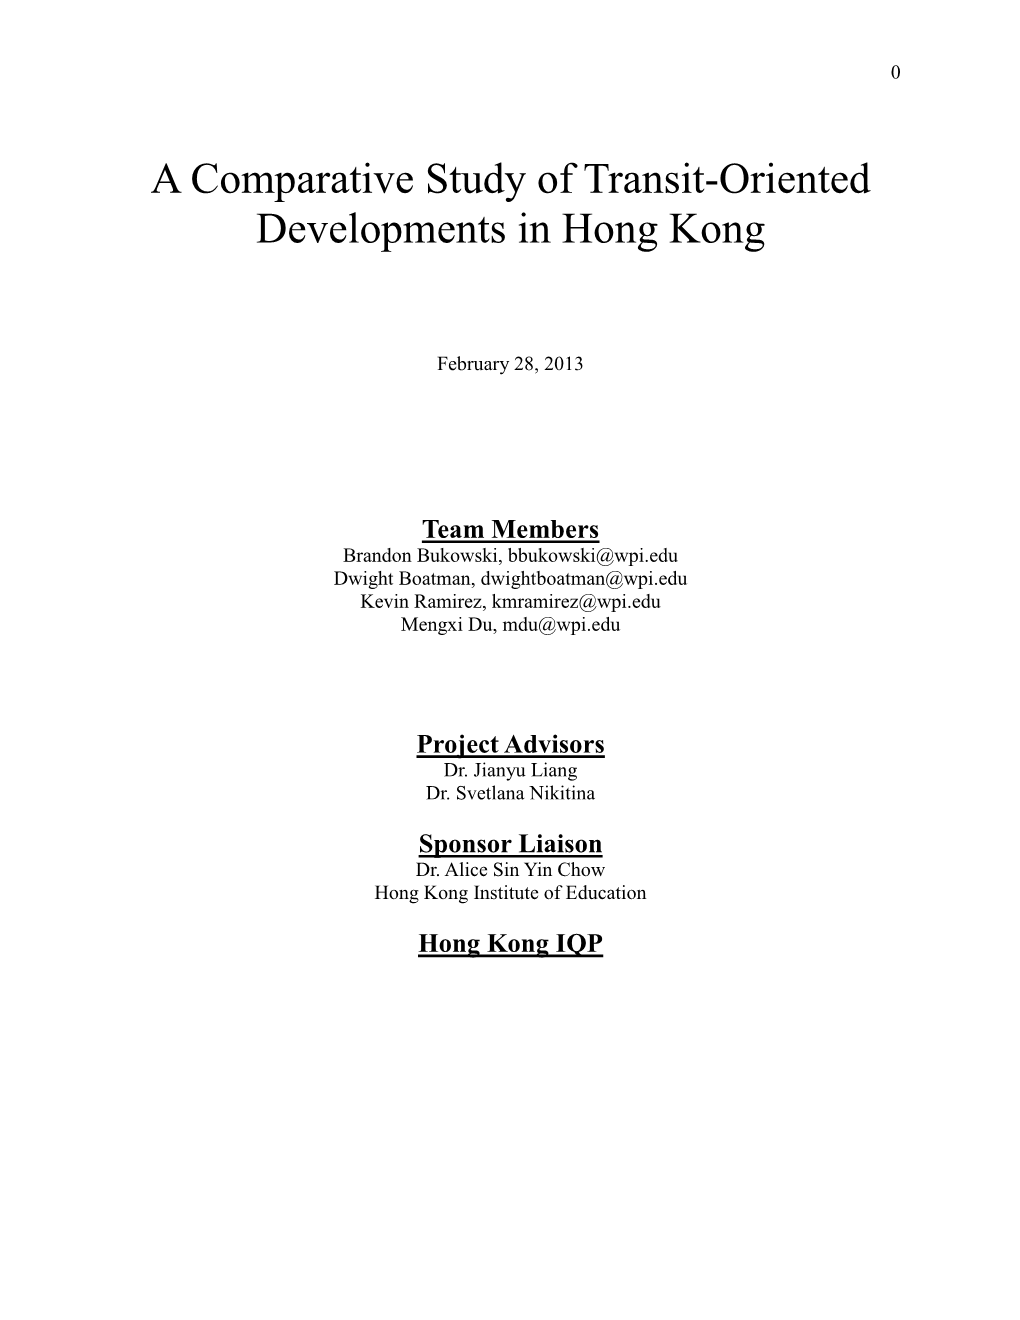 A Comparative Study of Transit-Oriented Developments in Hong Kong